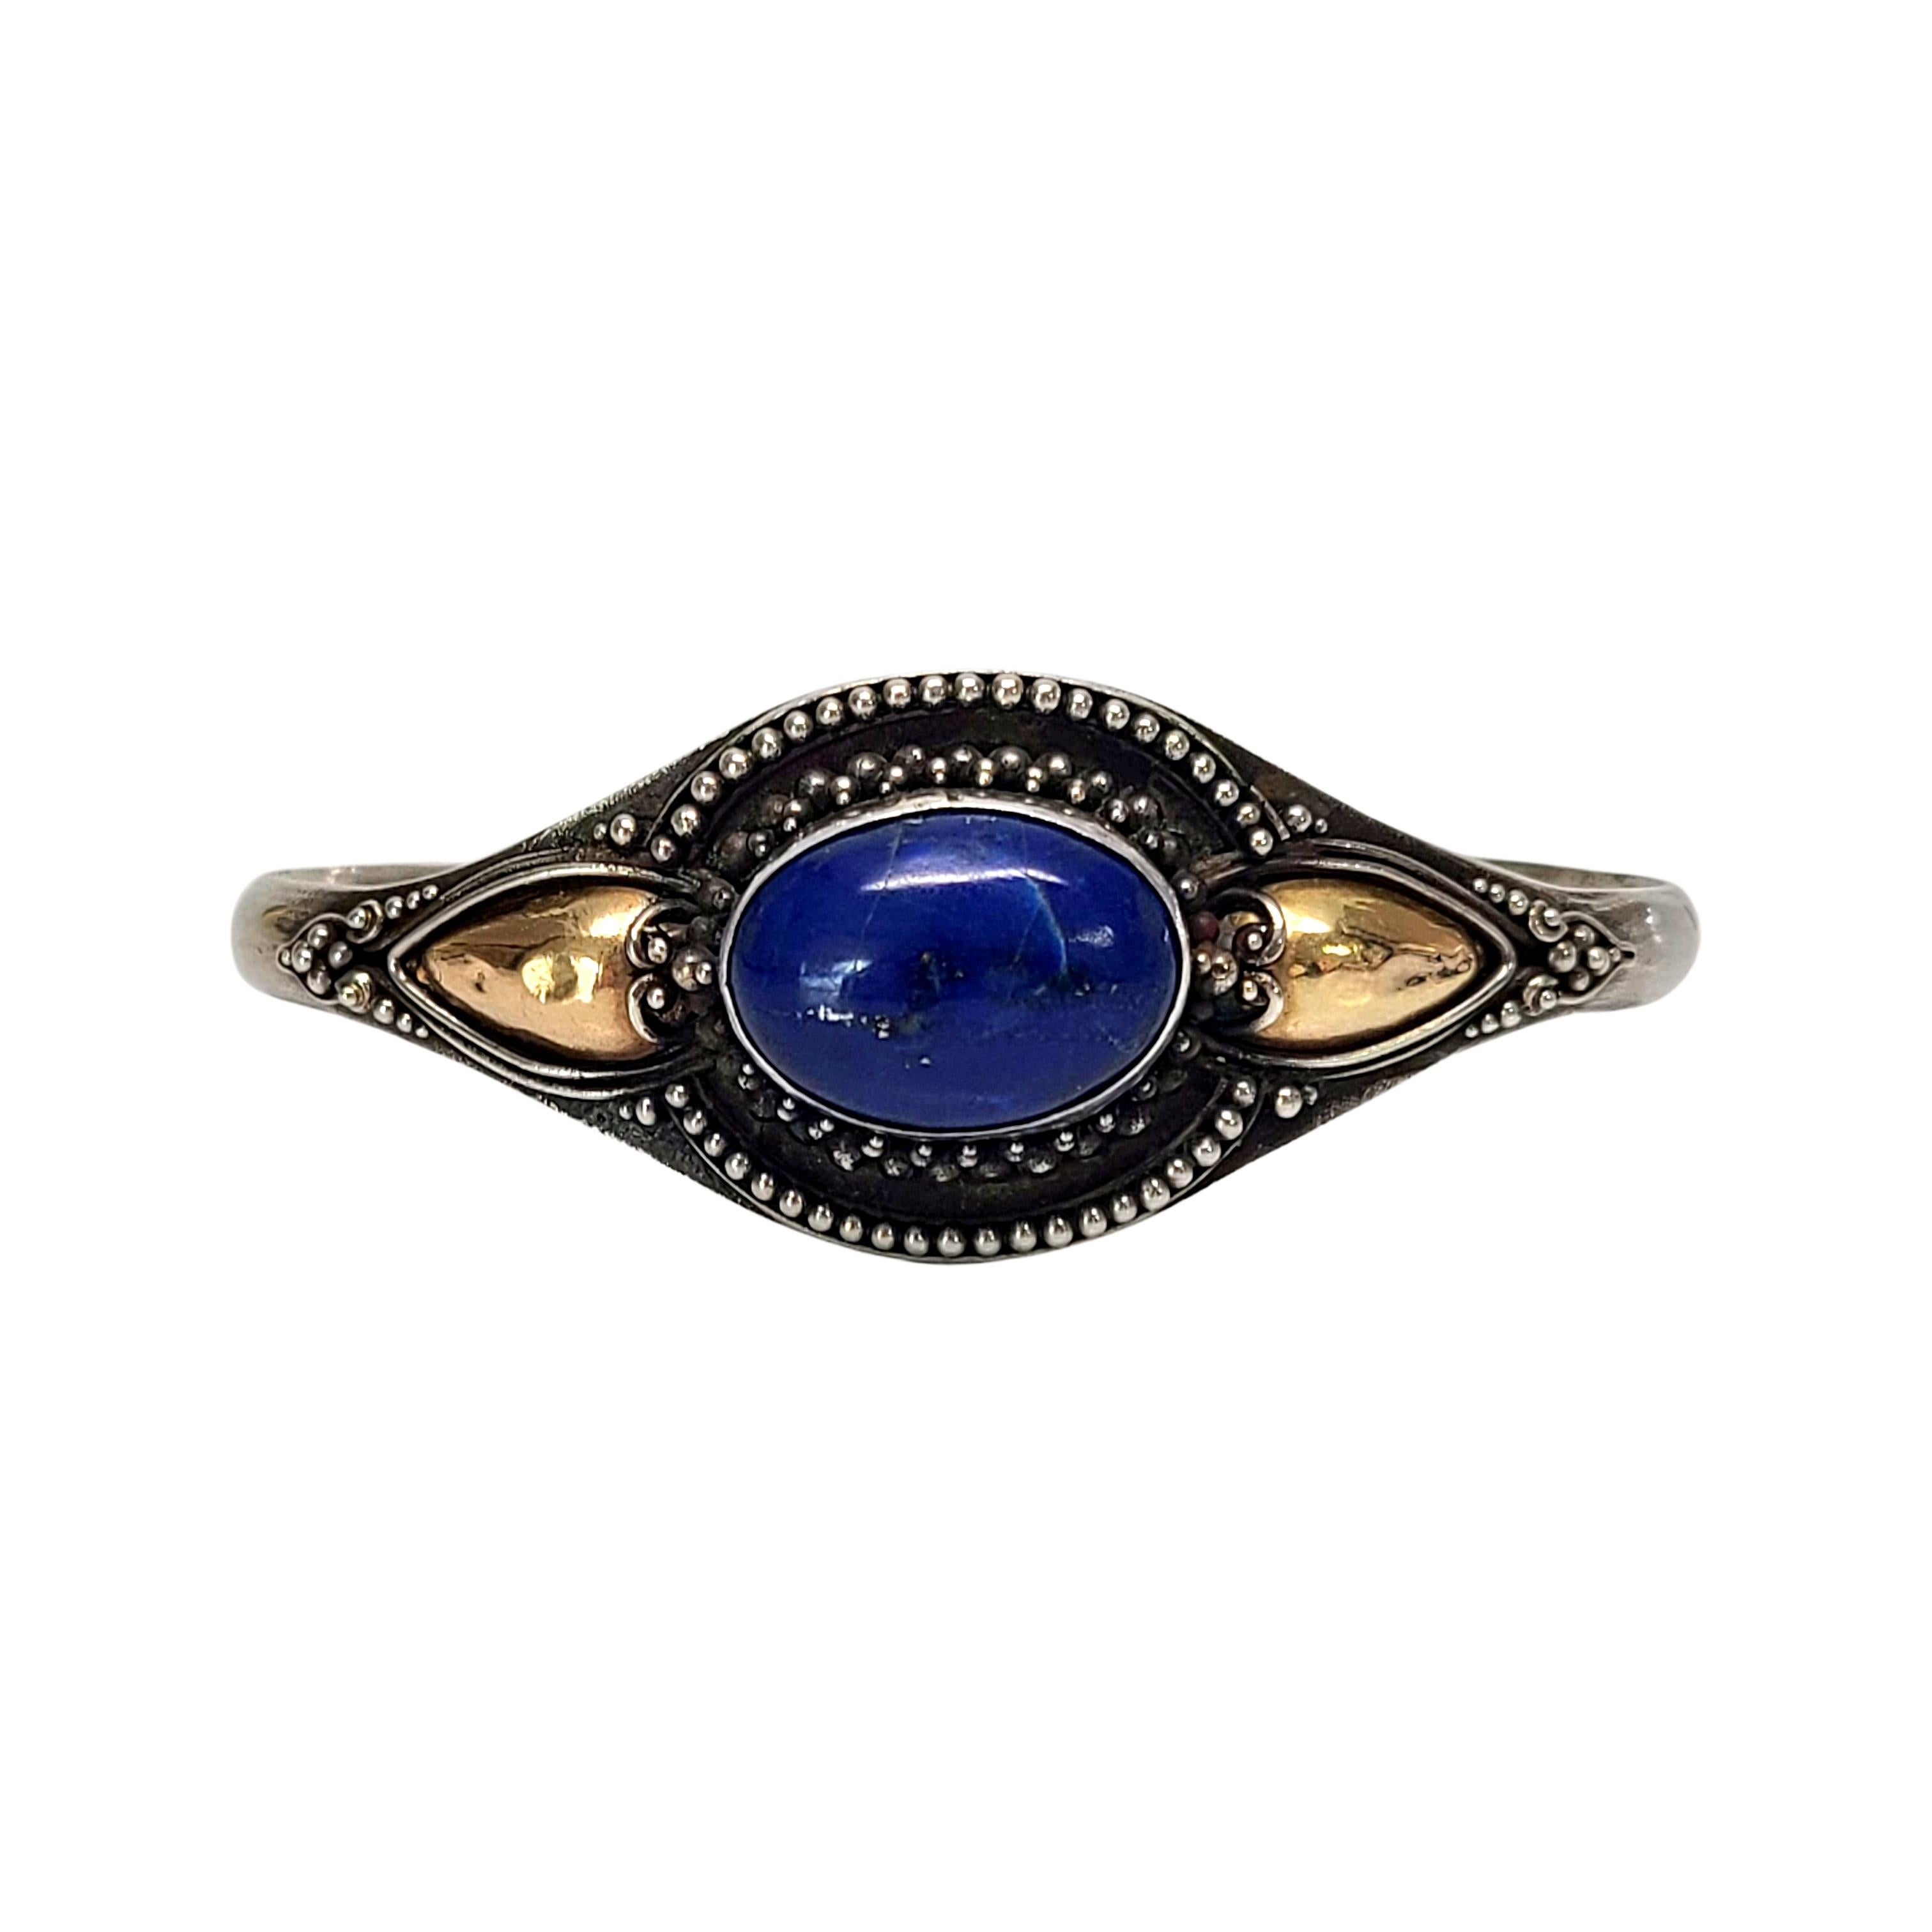 Sterling silver, 22K yellow gold accent and lapis lazuli bracelet.

Oval shaped bezel set lapis lazuli stone set in sterling silver with yellow gold dome accent on each side.

Measures approx 5 5/8